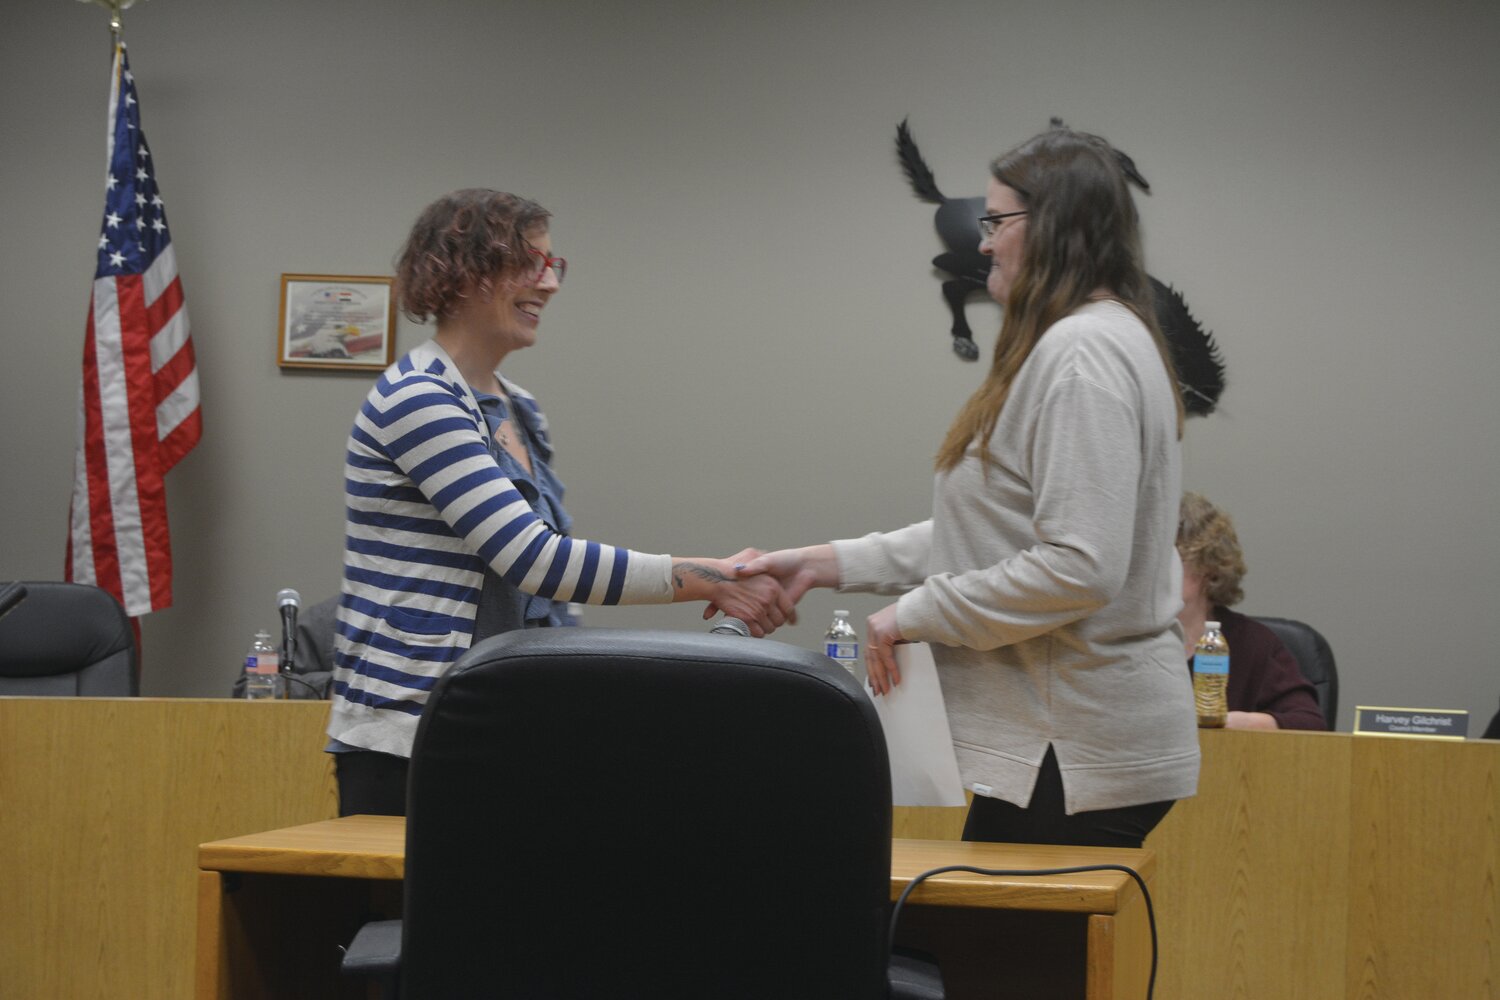 Rachel Chavez (left) is sworn in as the next Roy city councilor by Mayor Kimber Ivy (right) on Nov. 13.